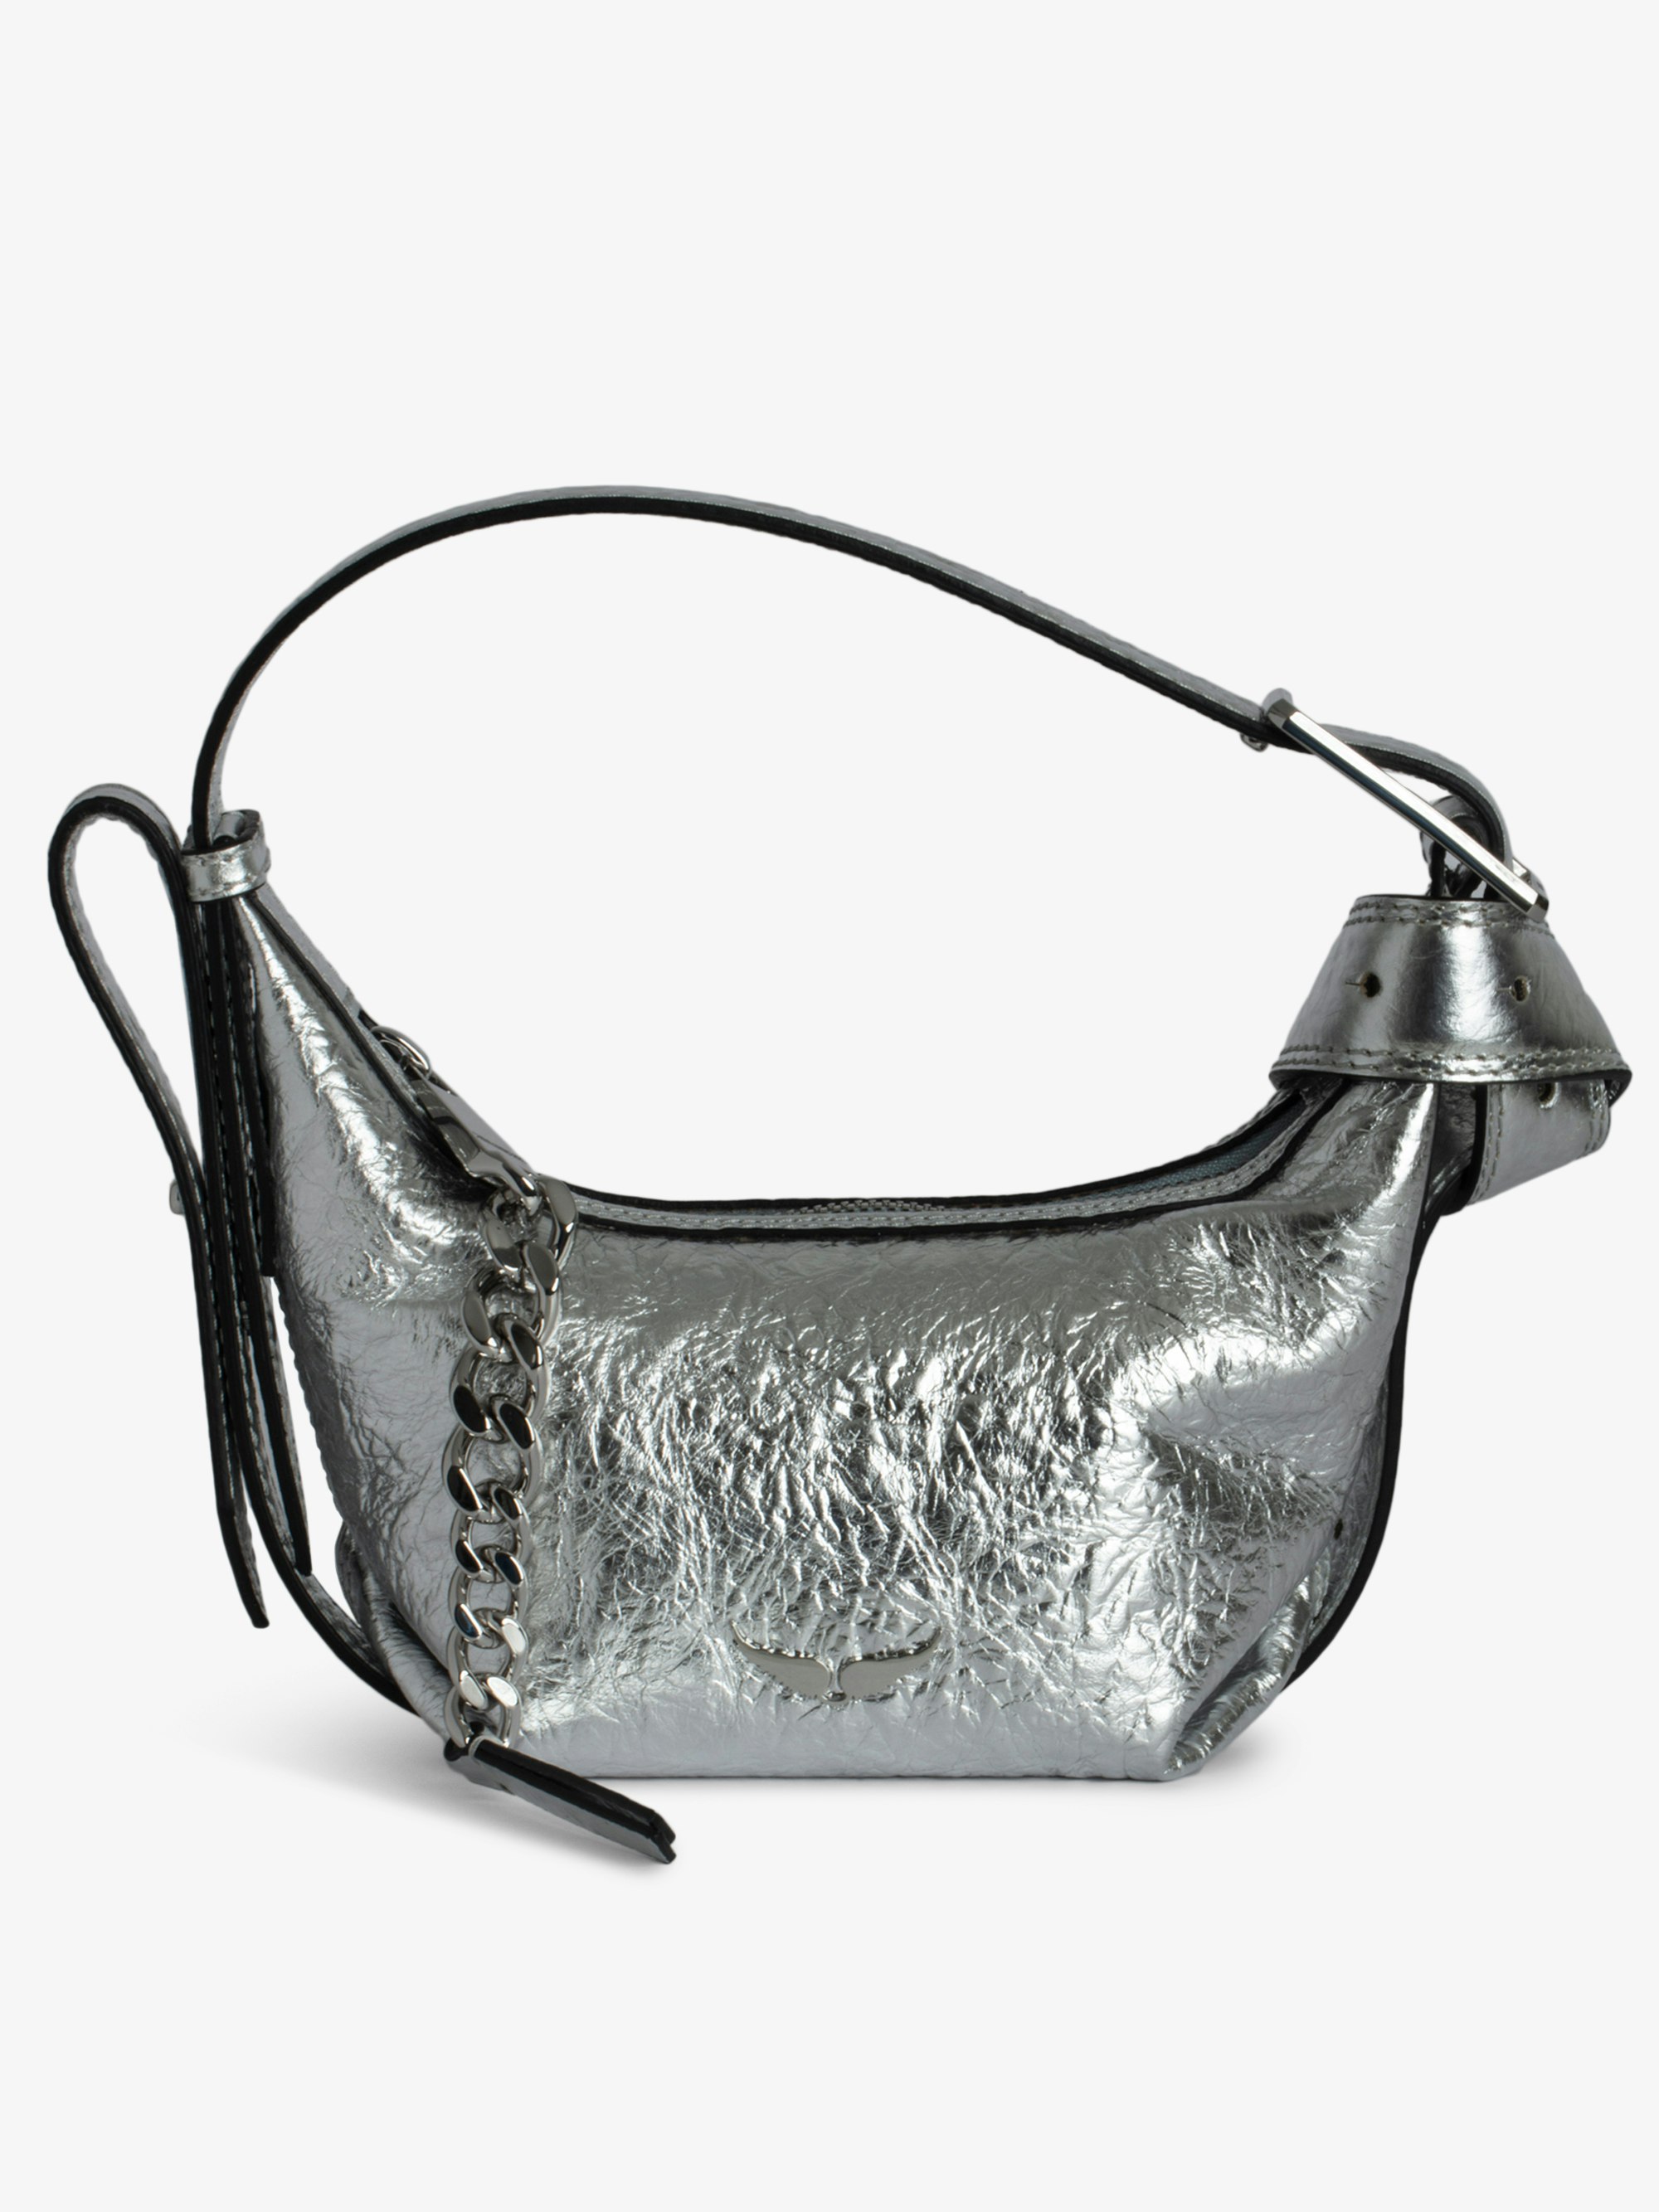 Le Cecilia XS Bag - Small metallic silver leather bag with crinkle effect, shoulder strap and metal C buckle.